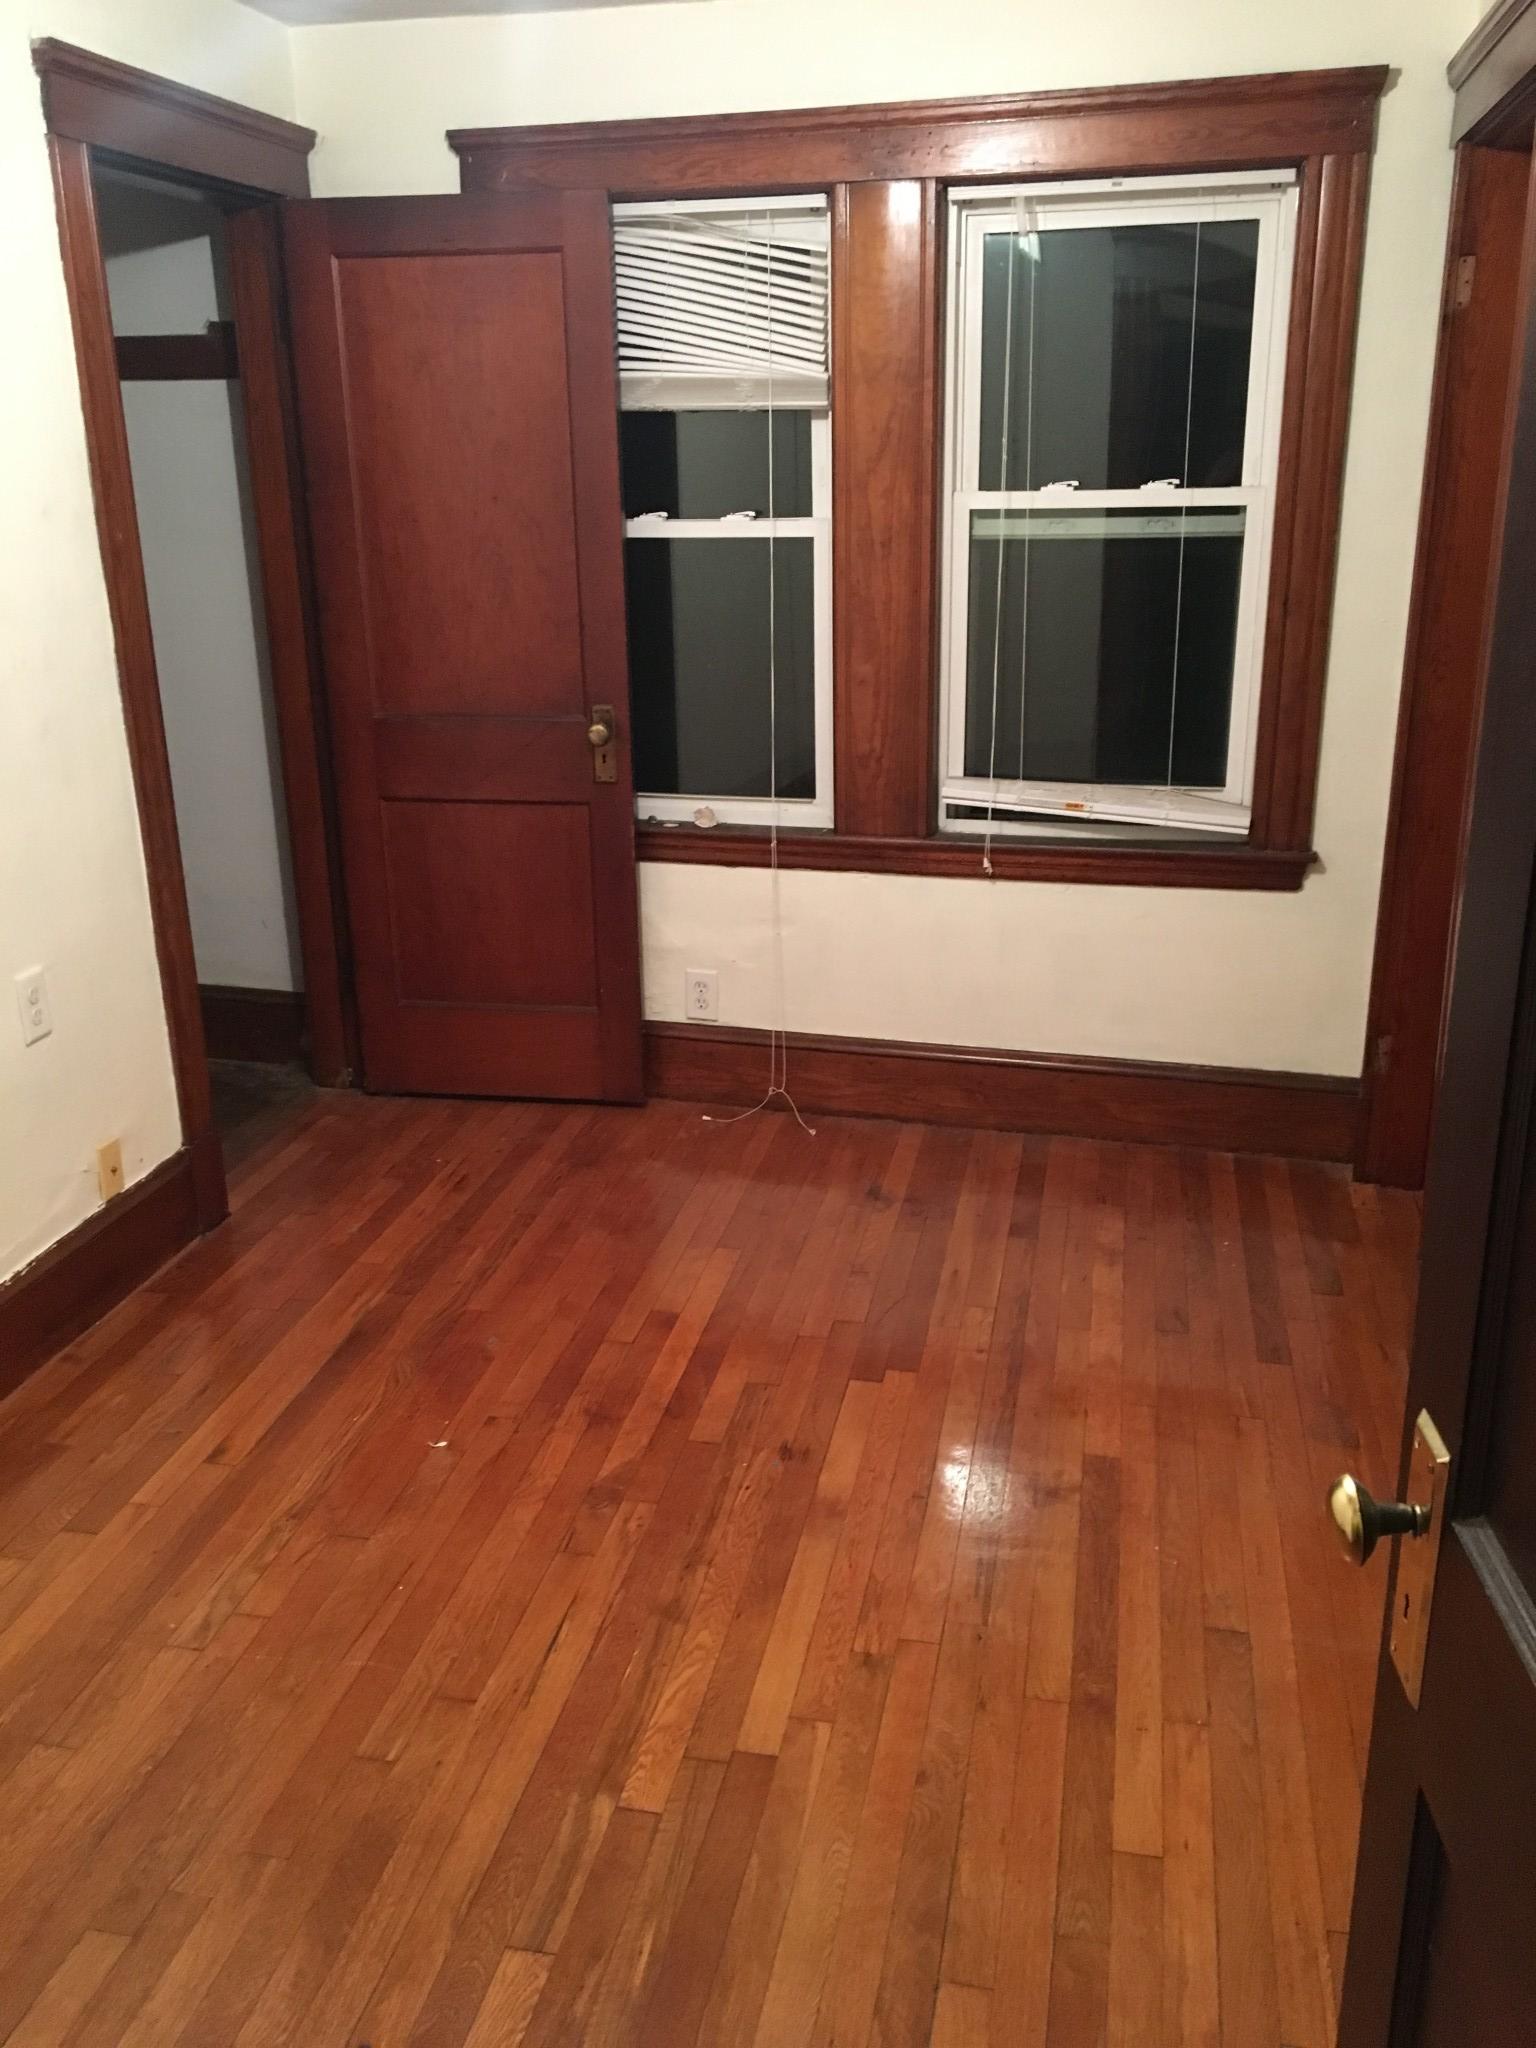 Photos of apartment on Tremont St.,Malden MA 02148